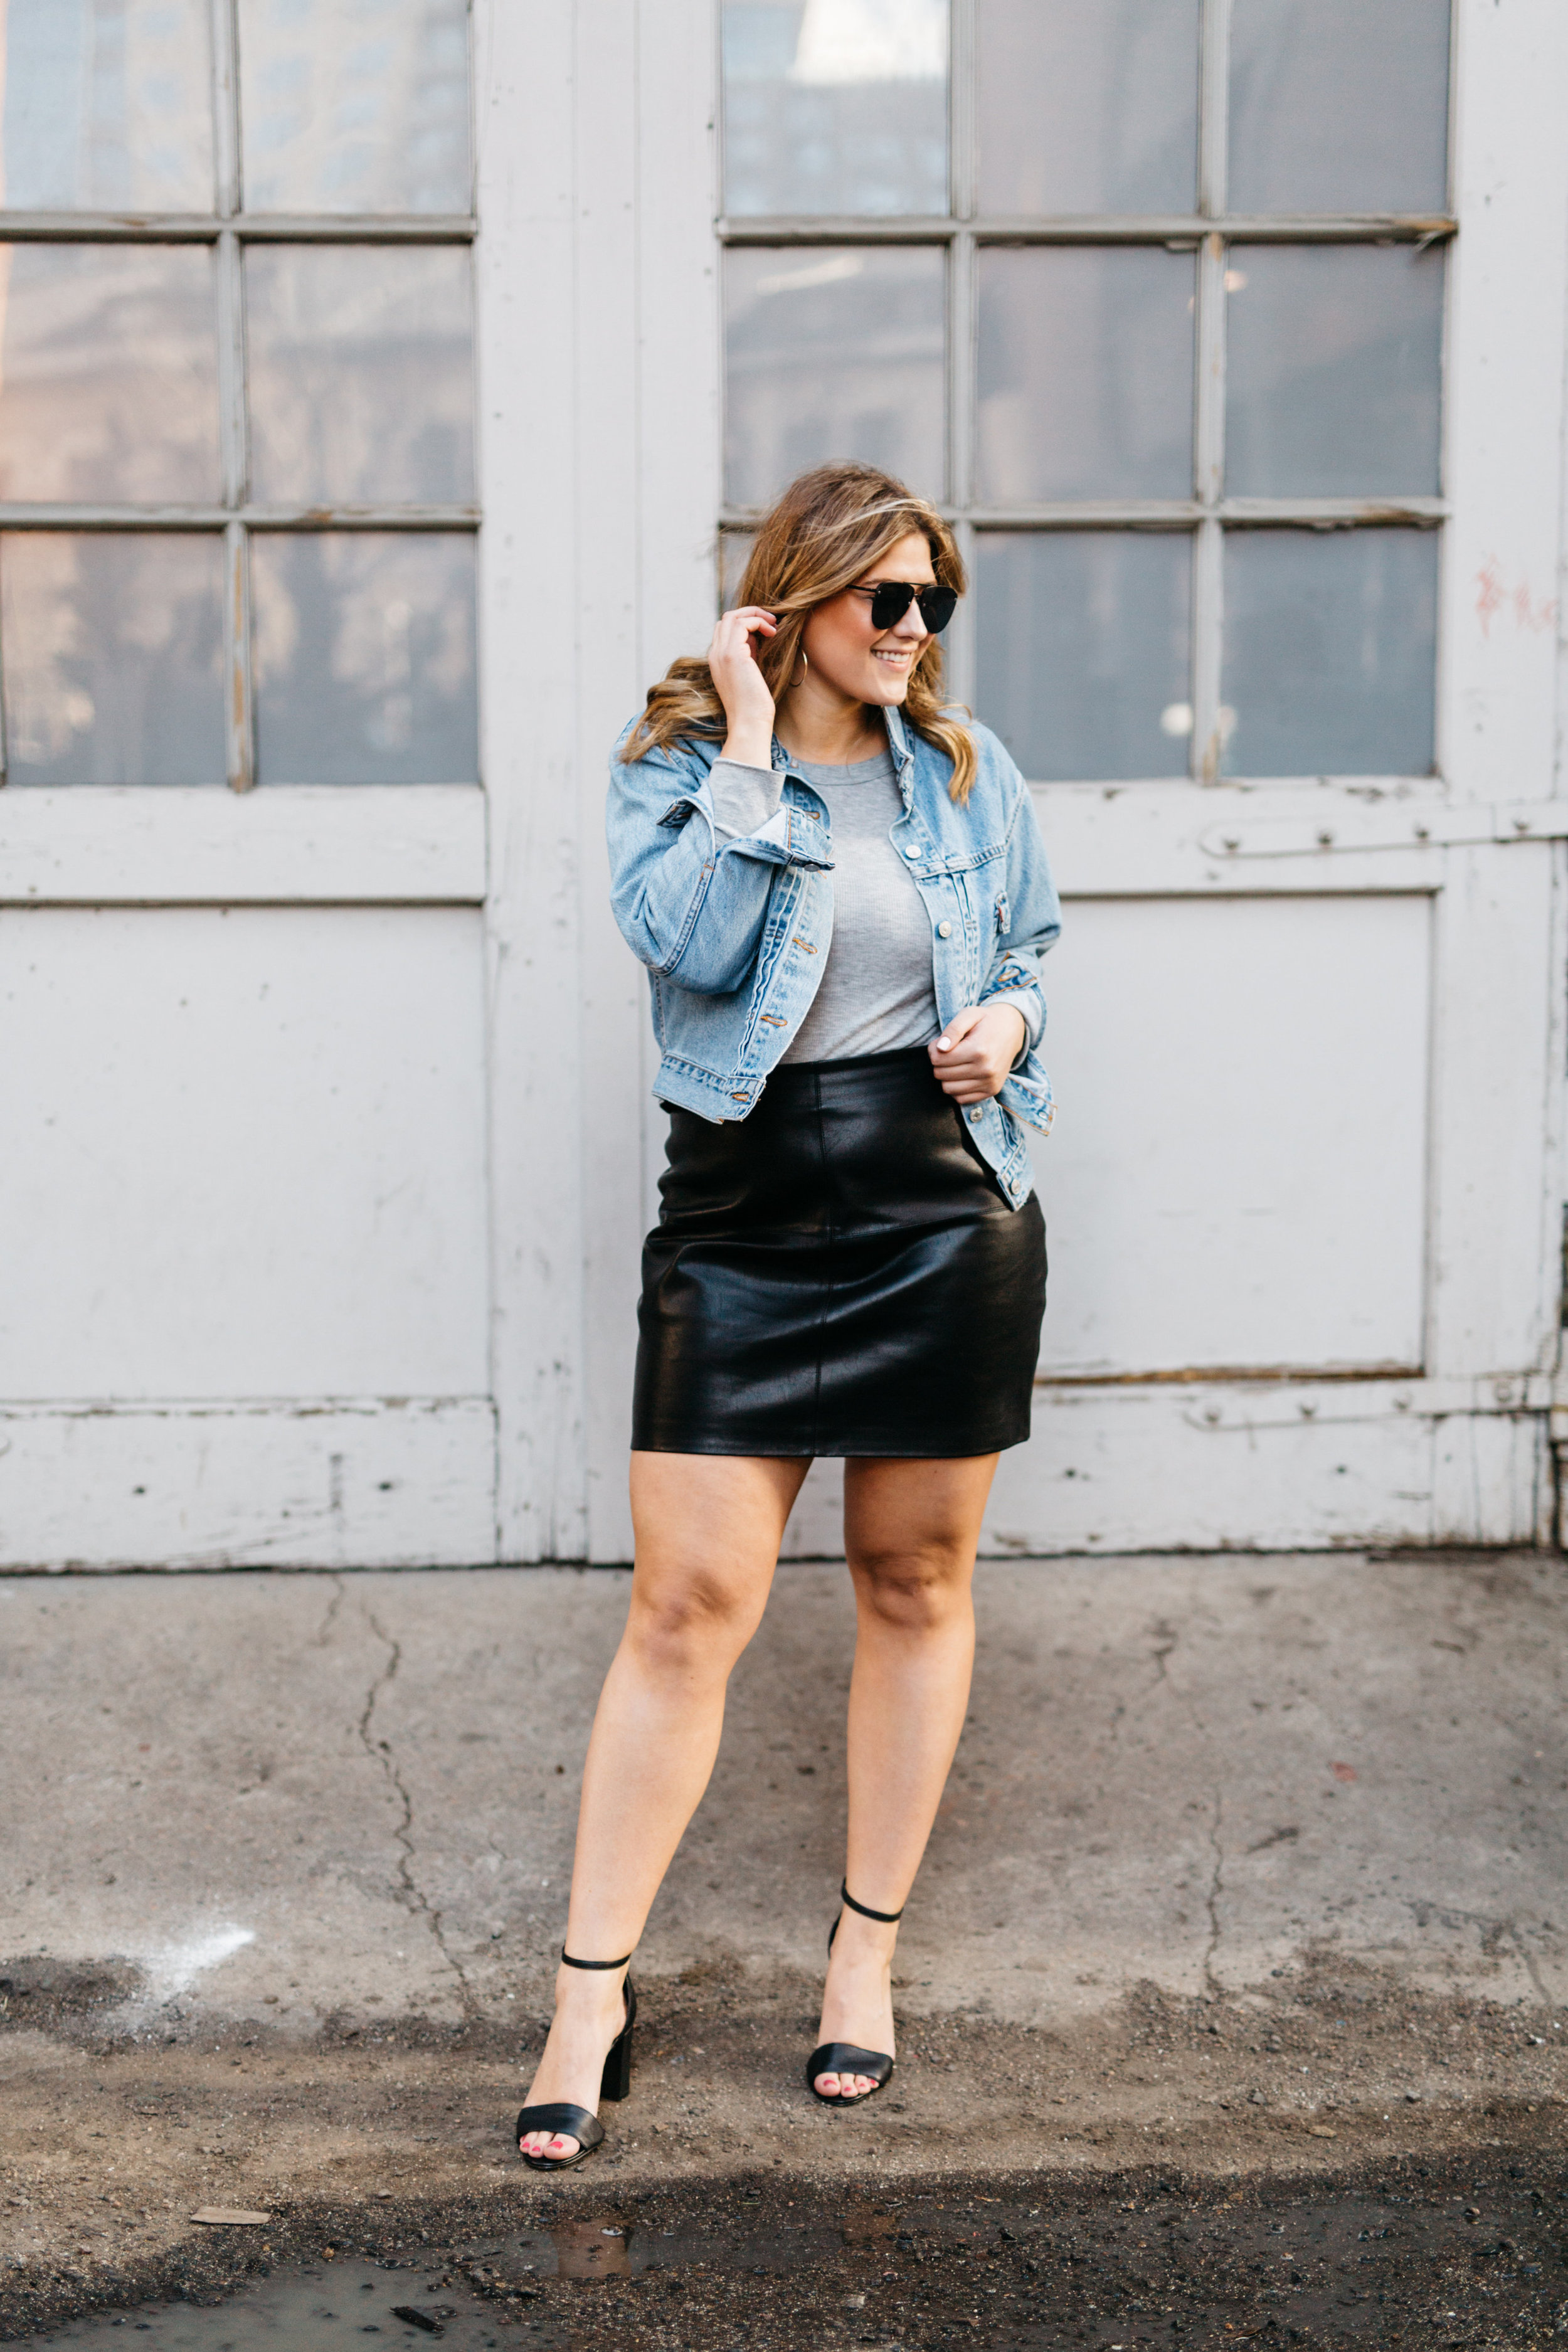 Styling A Leather Skirt